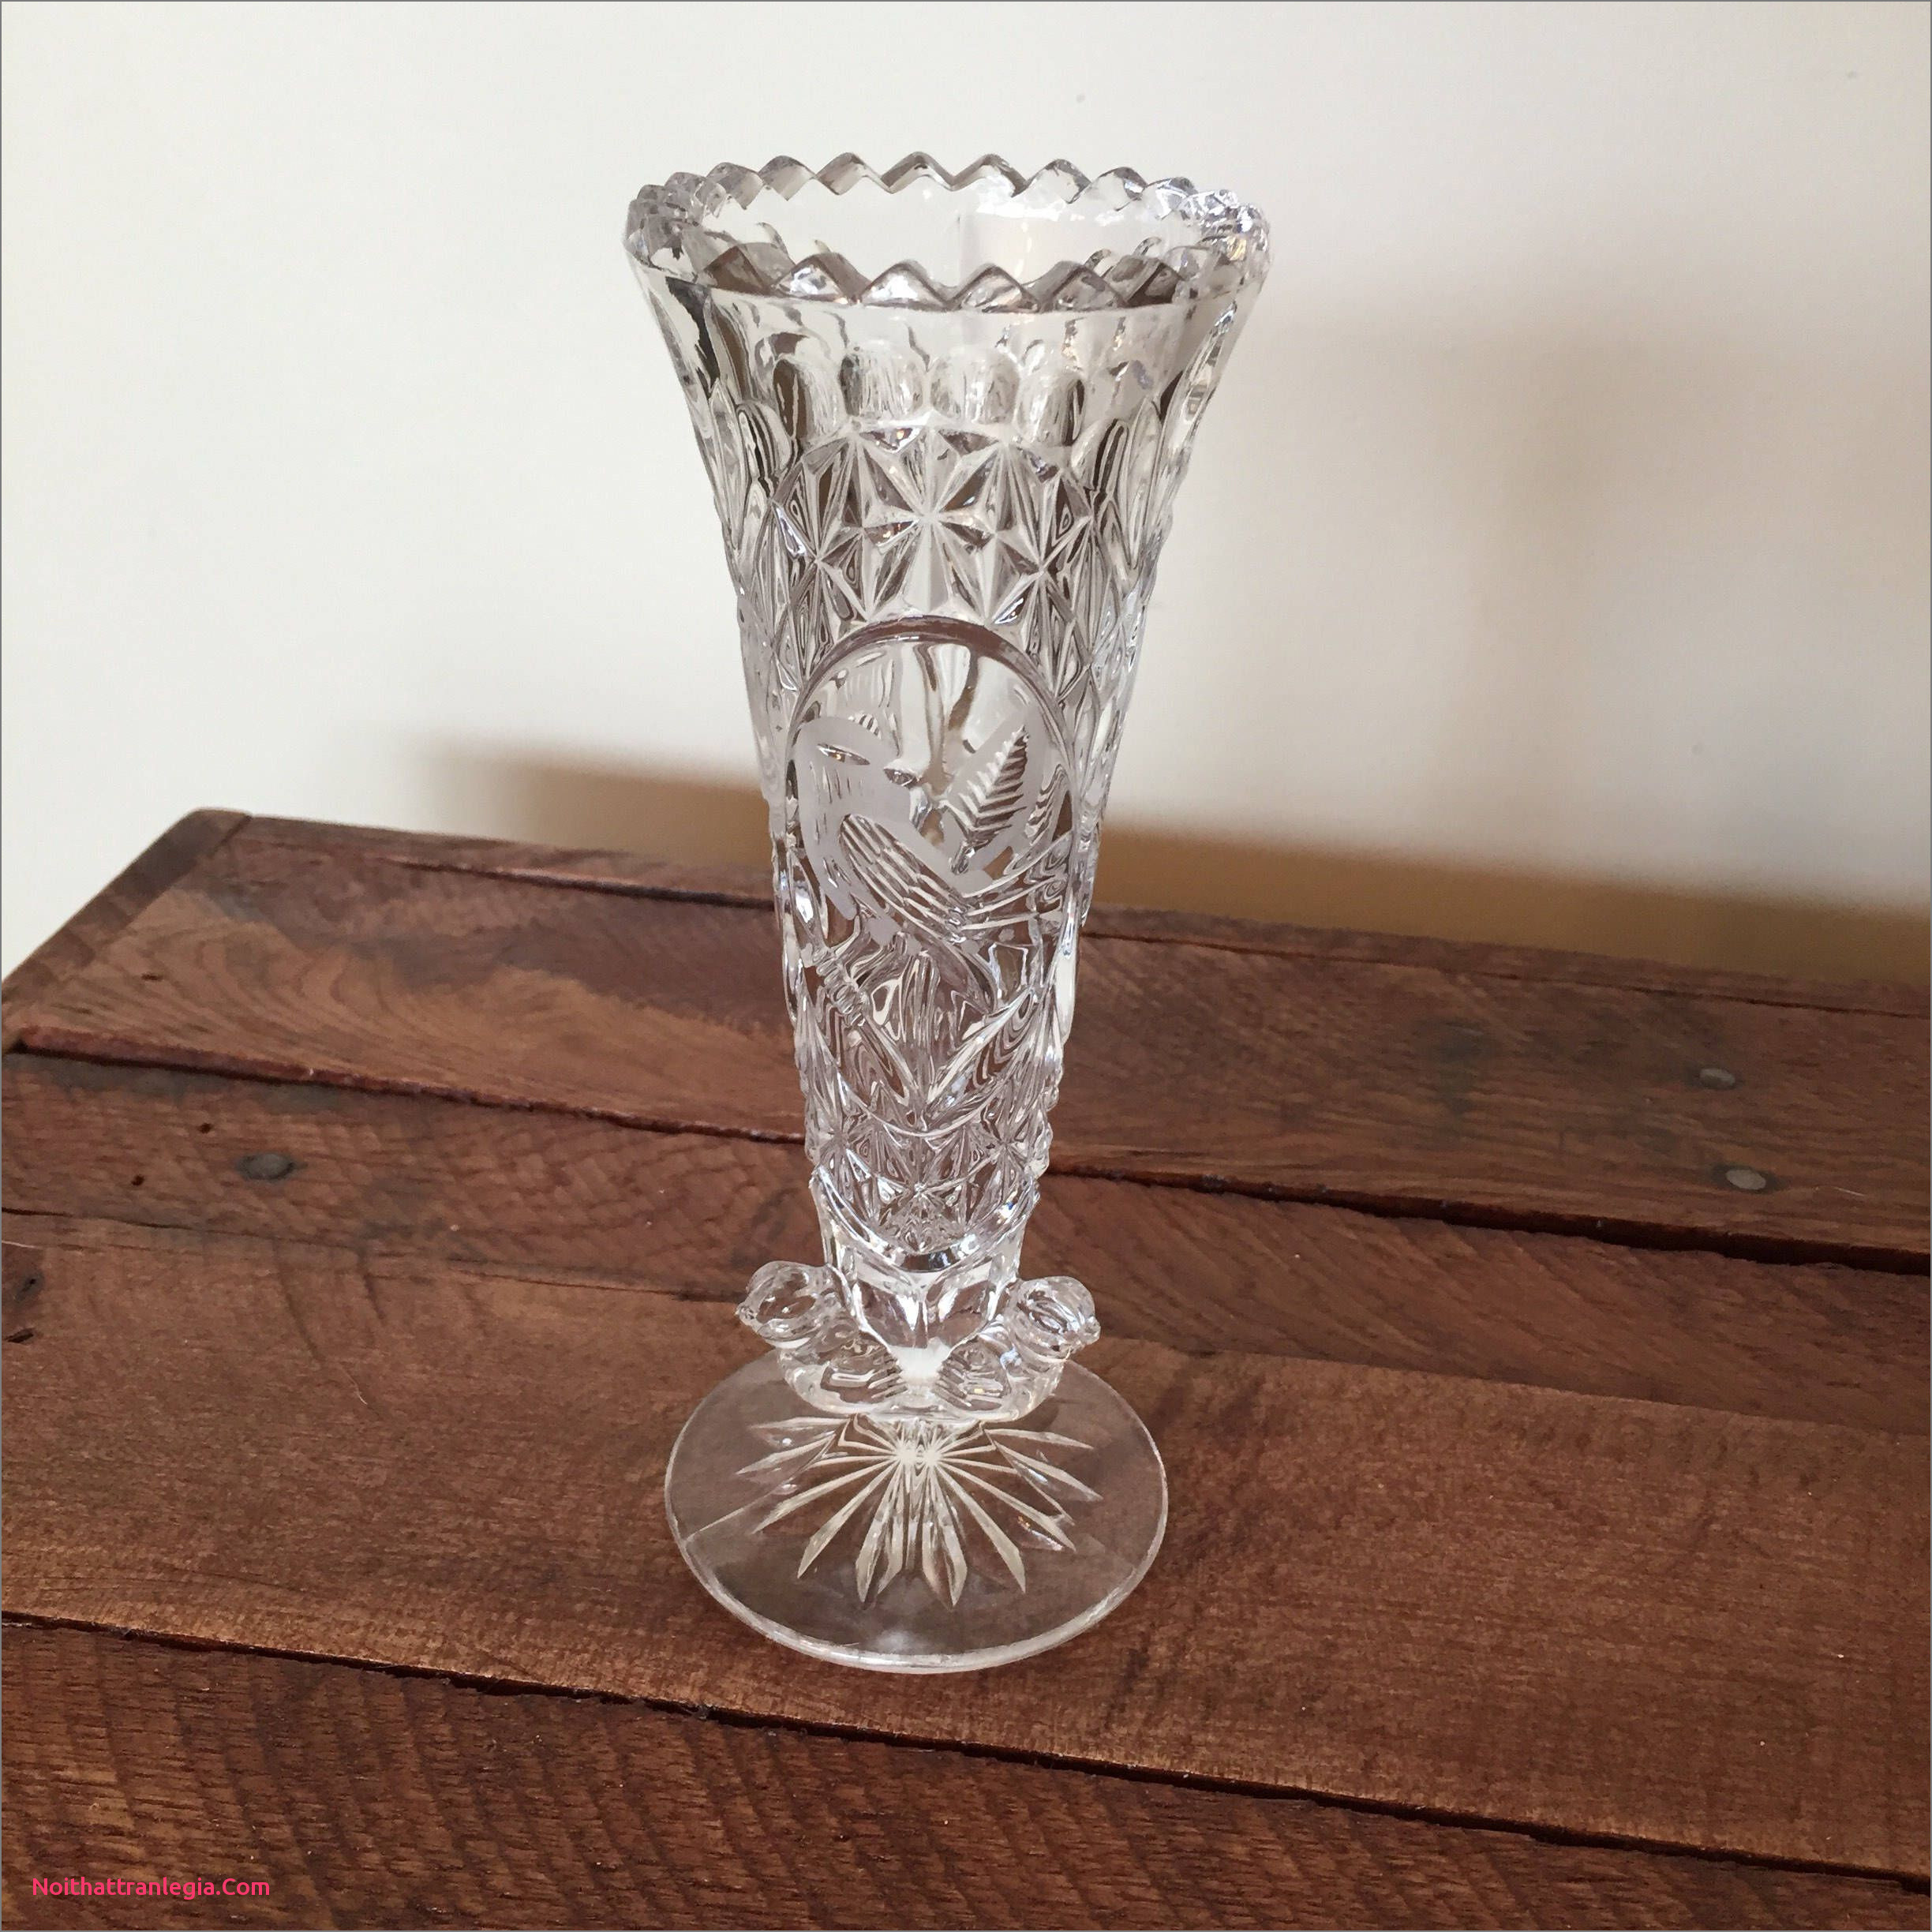 19 Stylish Old Clear Glass Vases 2024 free download old clear glass vases of 20 cut glass antique vase noithattranlegia vases design pertaining to vintage cut glass bird vase etched glass vase three glass birds perched on vase crystal bird